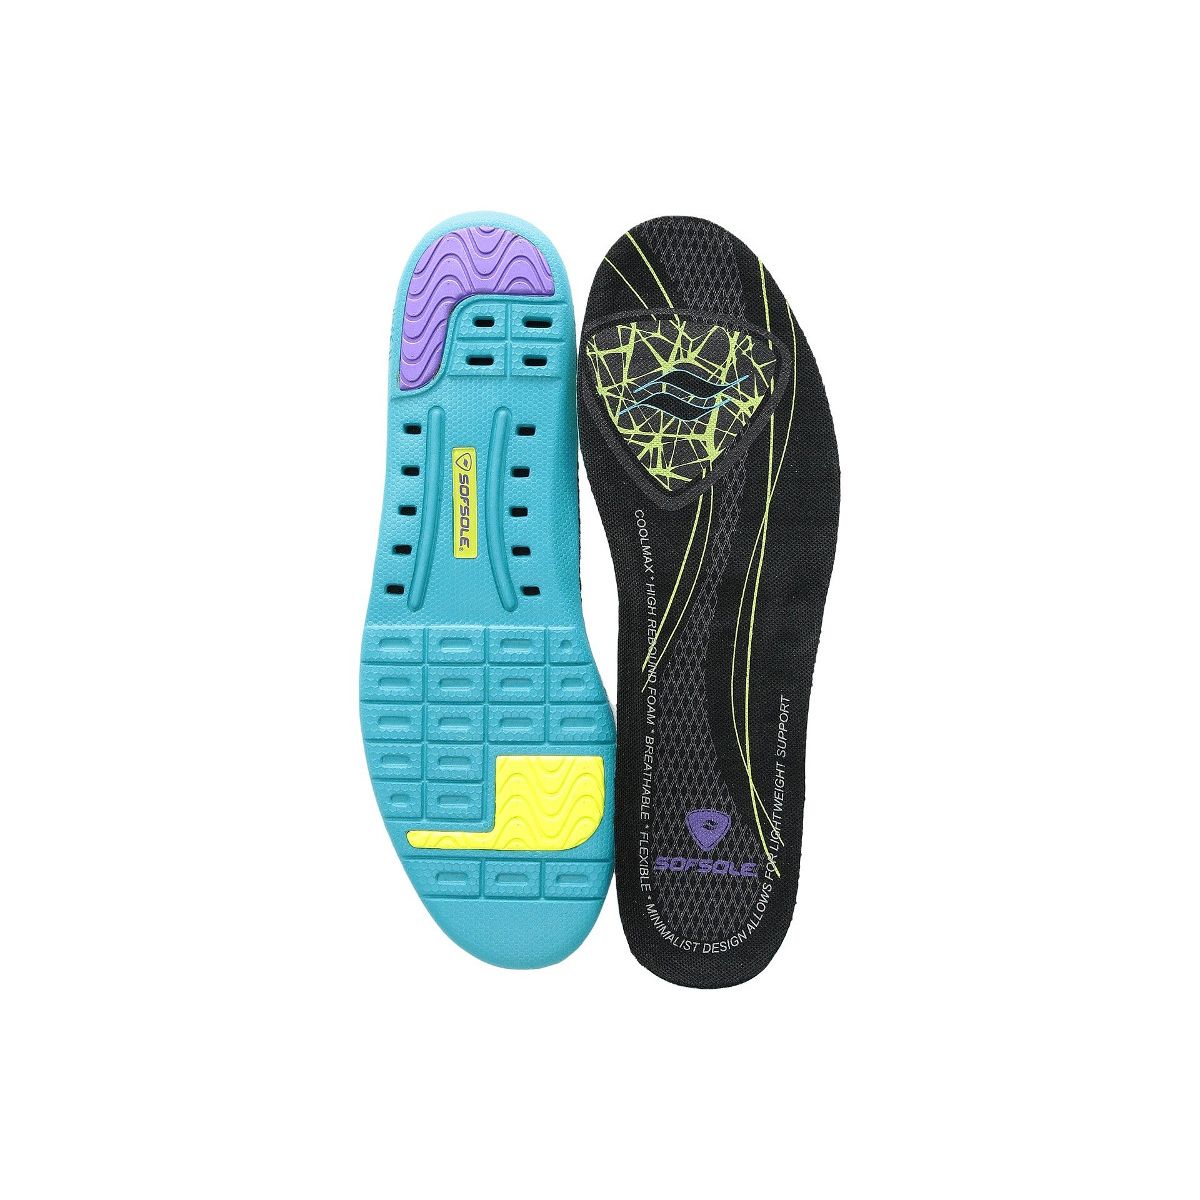 Sofsole Thin Fit Women's Insoles 134217